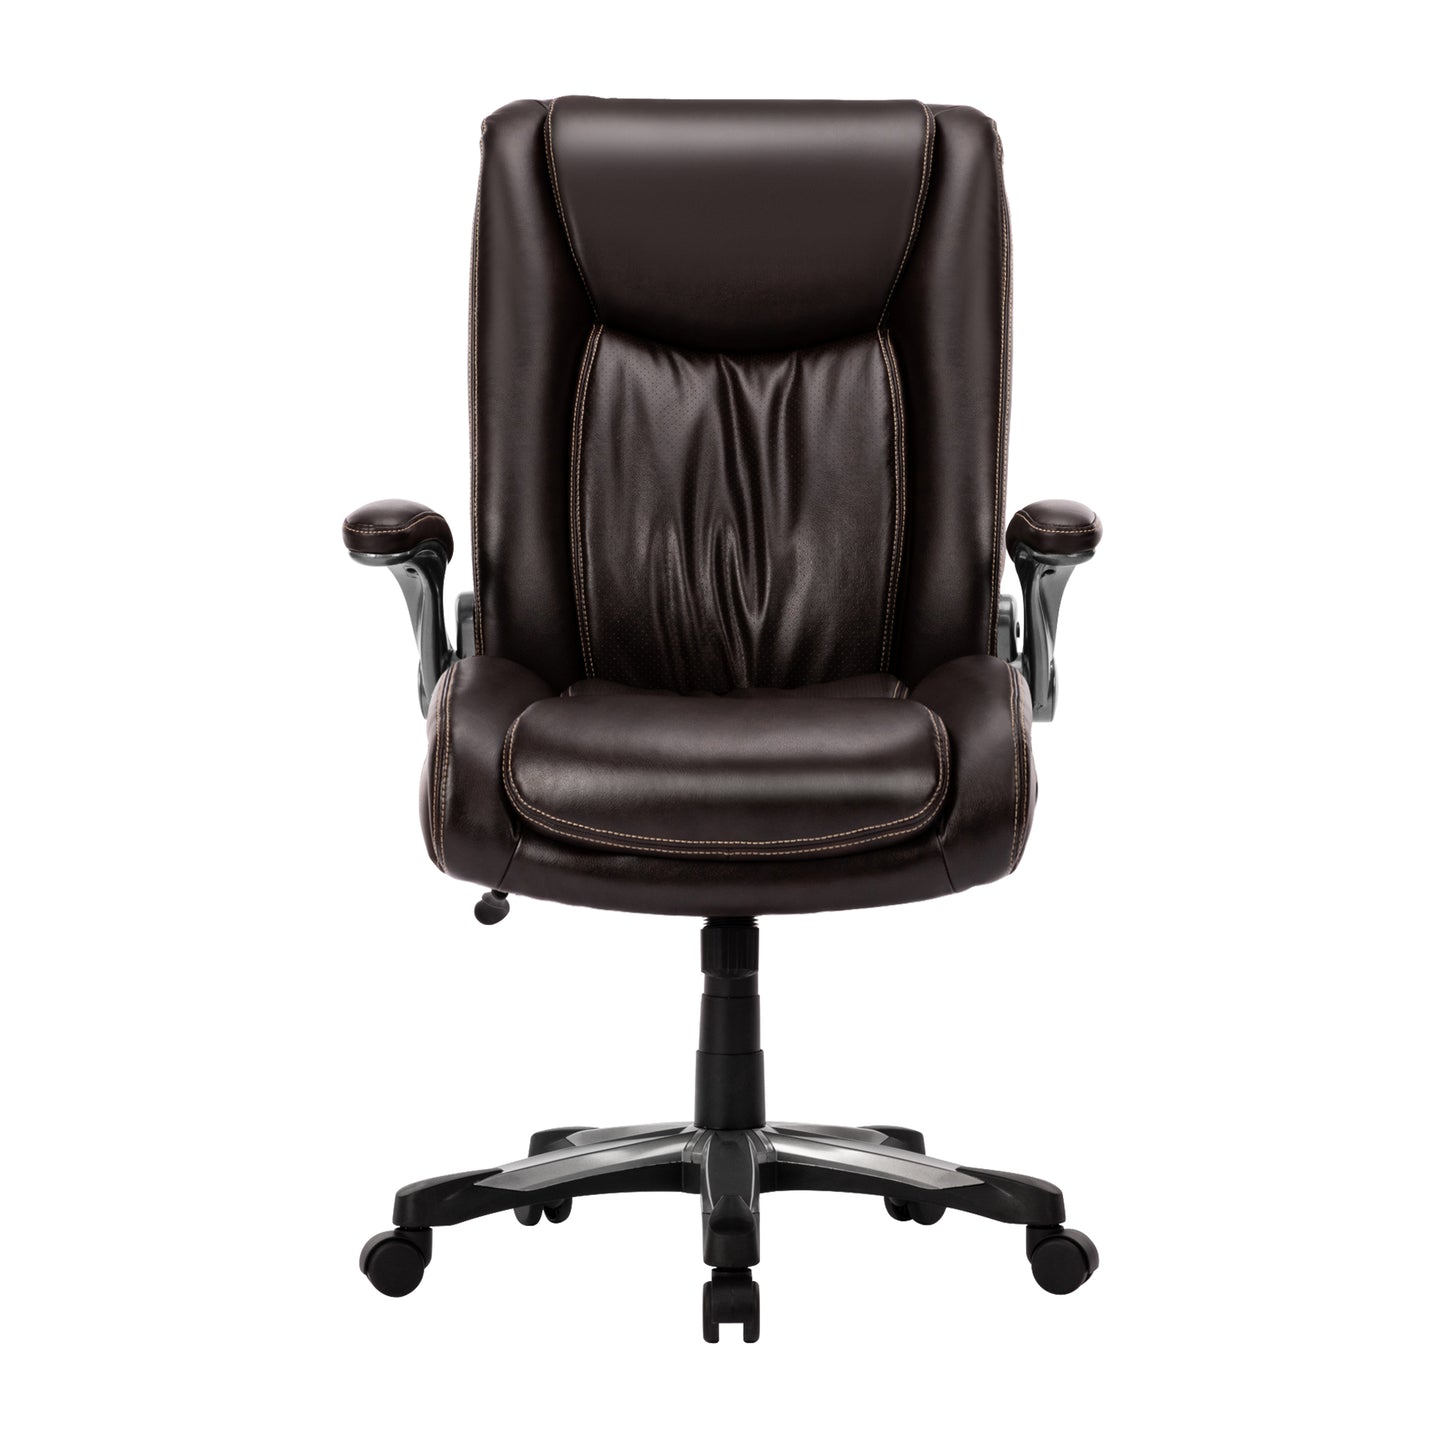 COLAMY PU Leather Big & Tall Office Chair 400lbs Computer Chair Model.5309